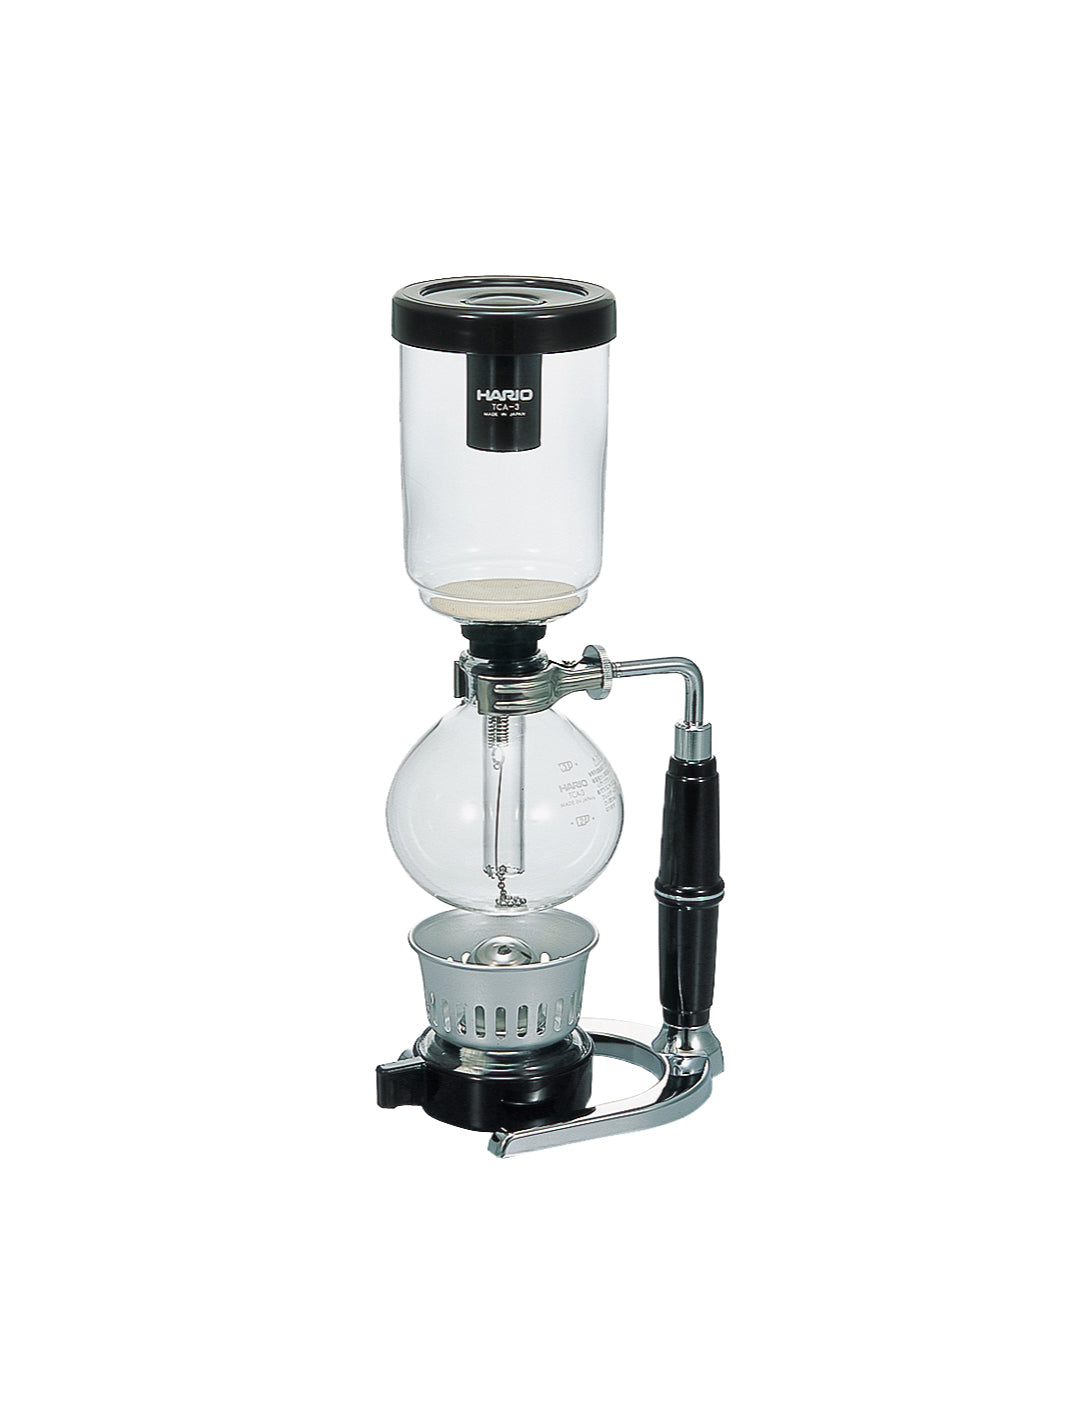 HARIO TCA-3 Technica Syphon / Syphon Brewers | Eight Ounce Coffee